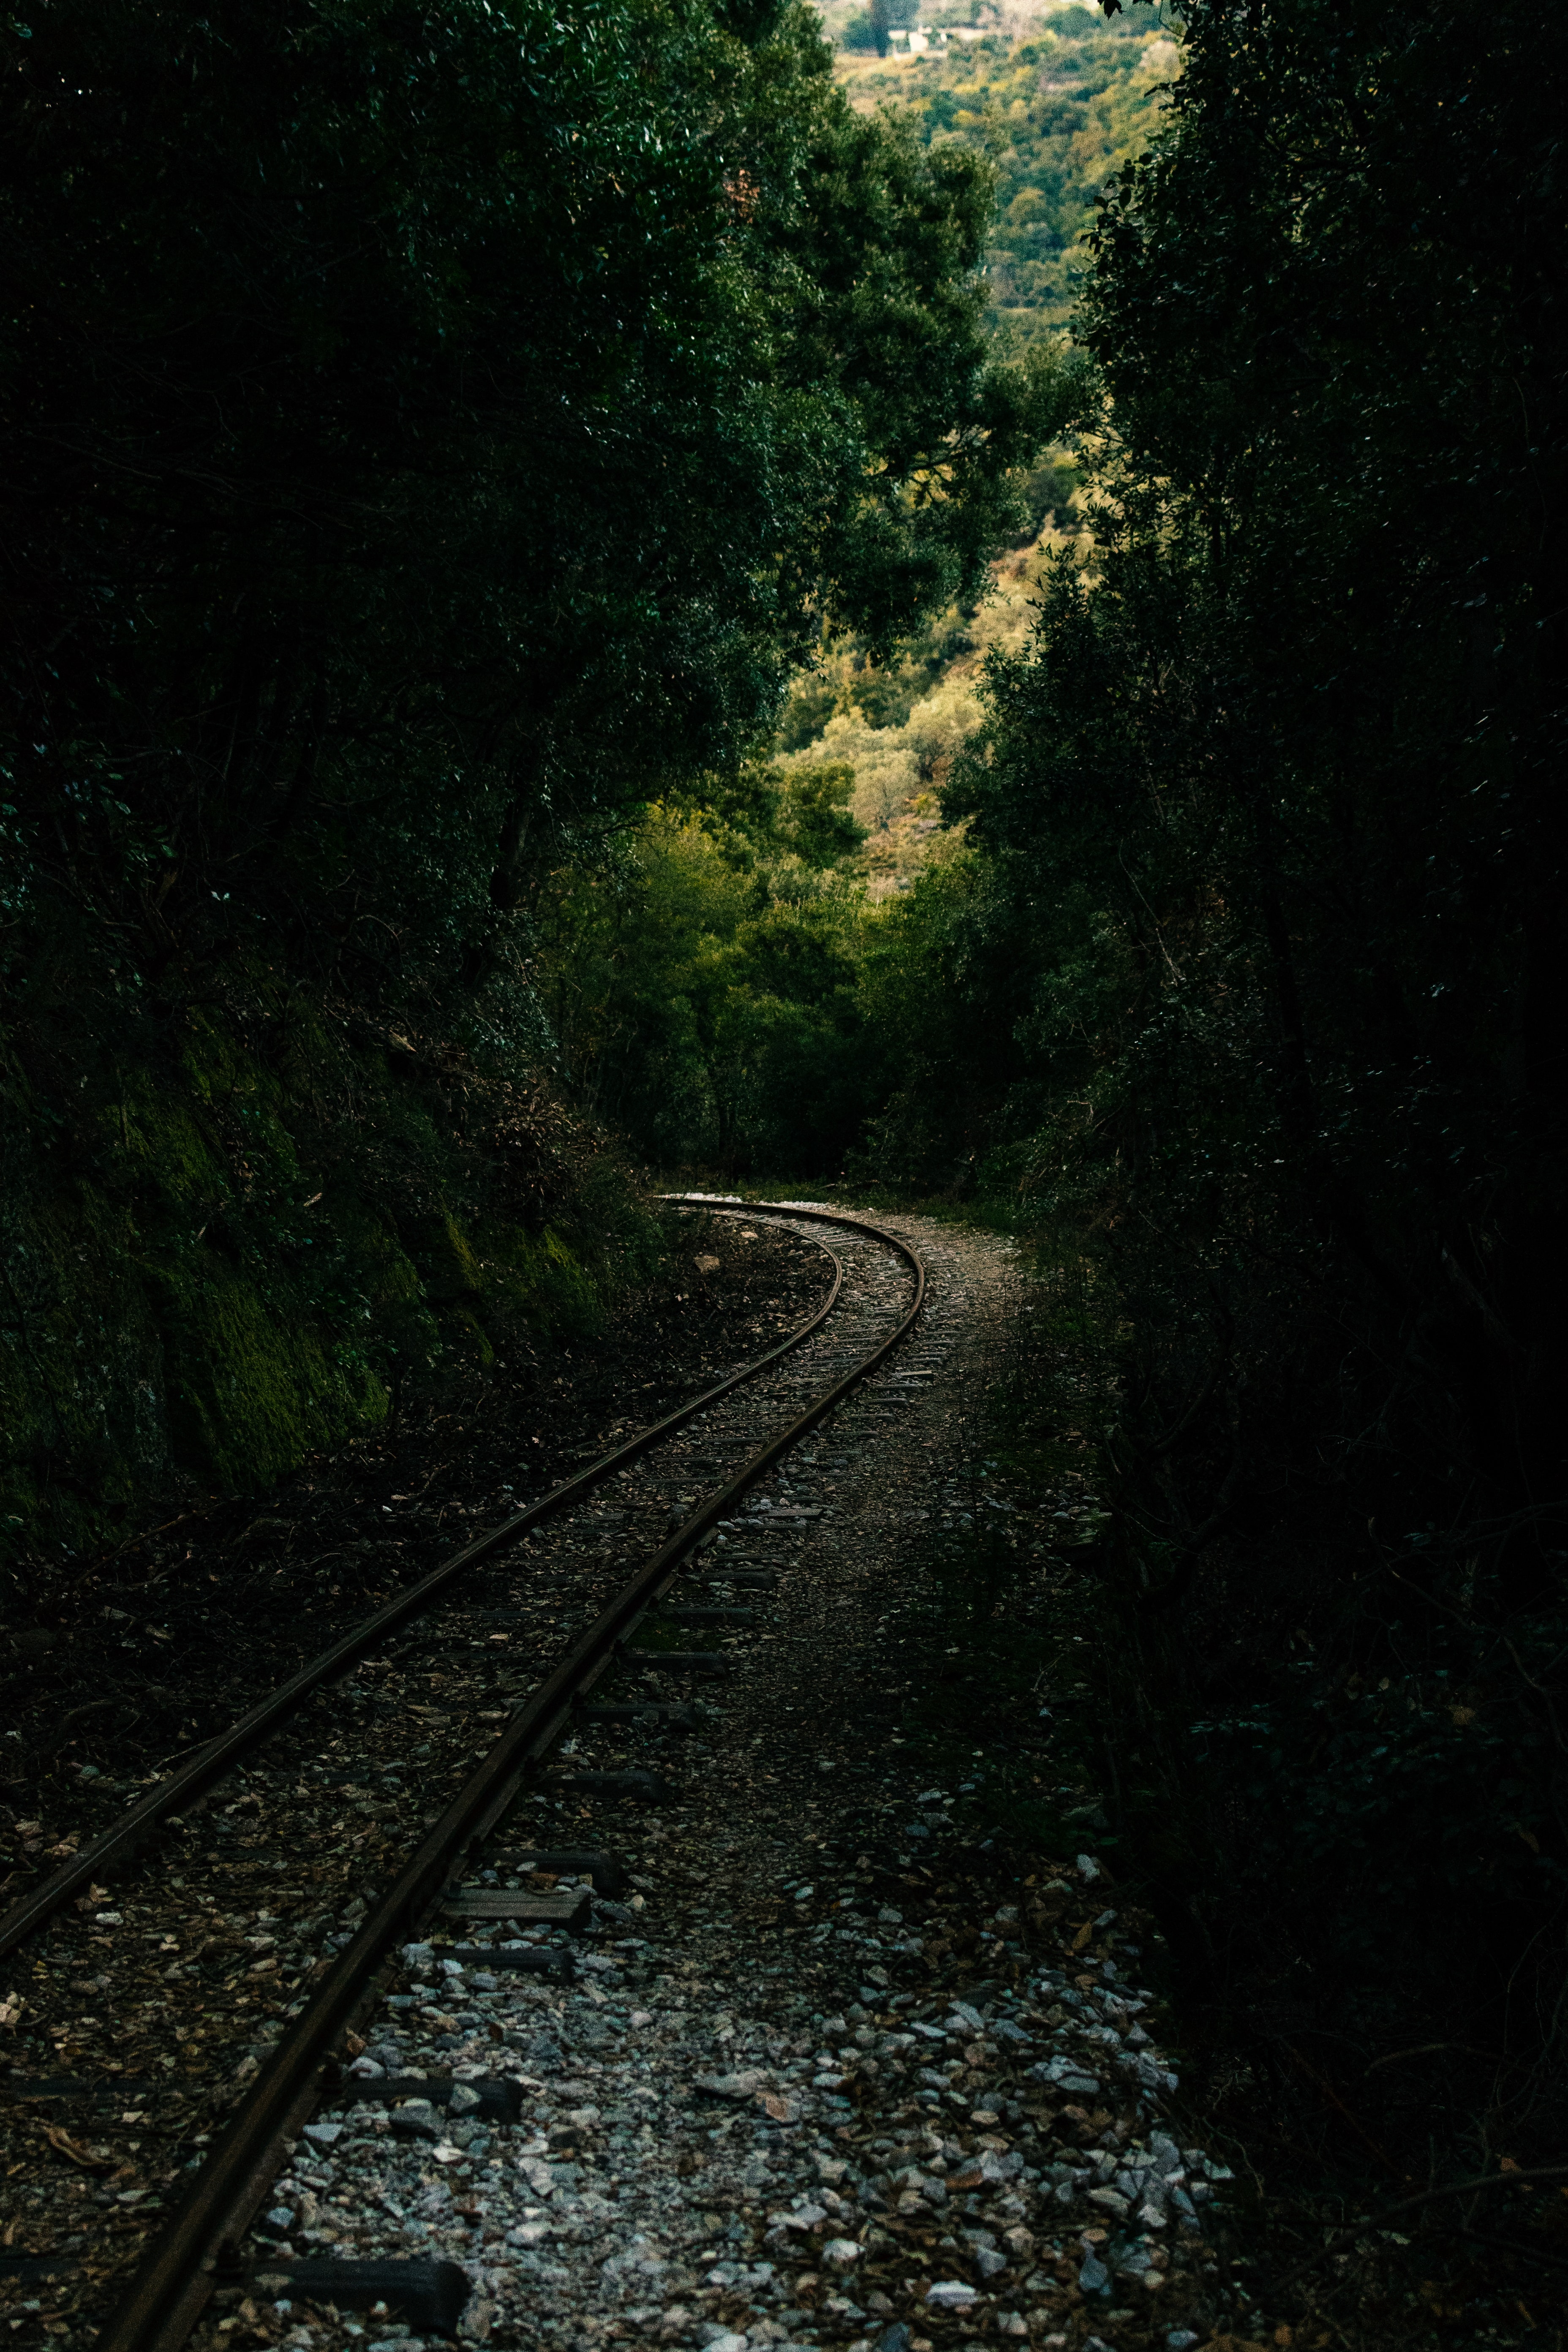 alley, nature, forest, railway, rails